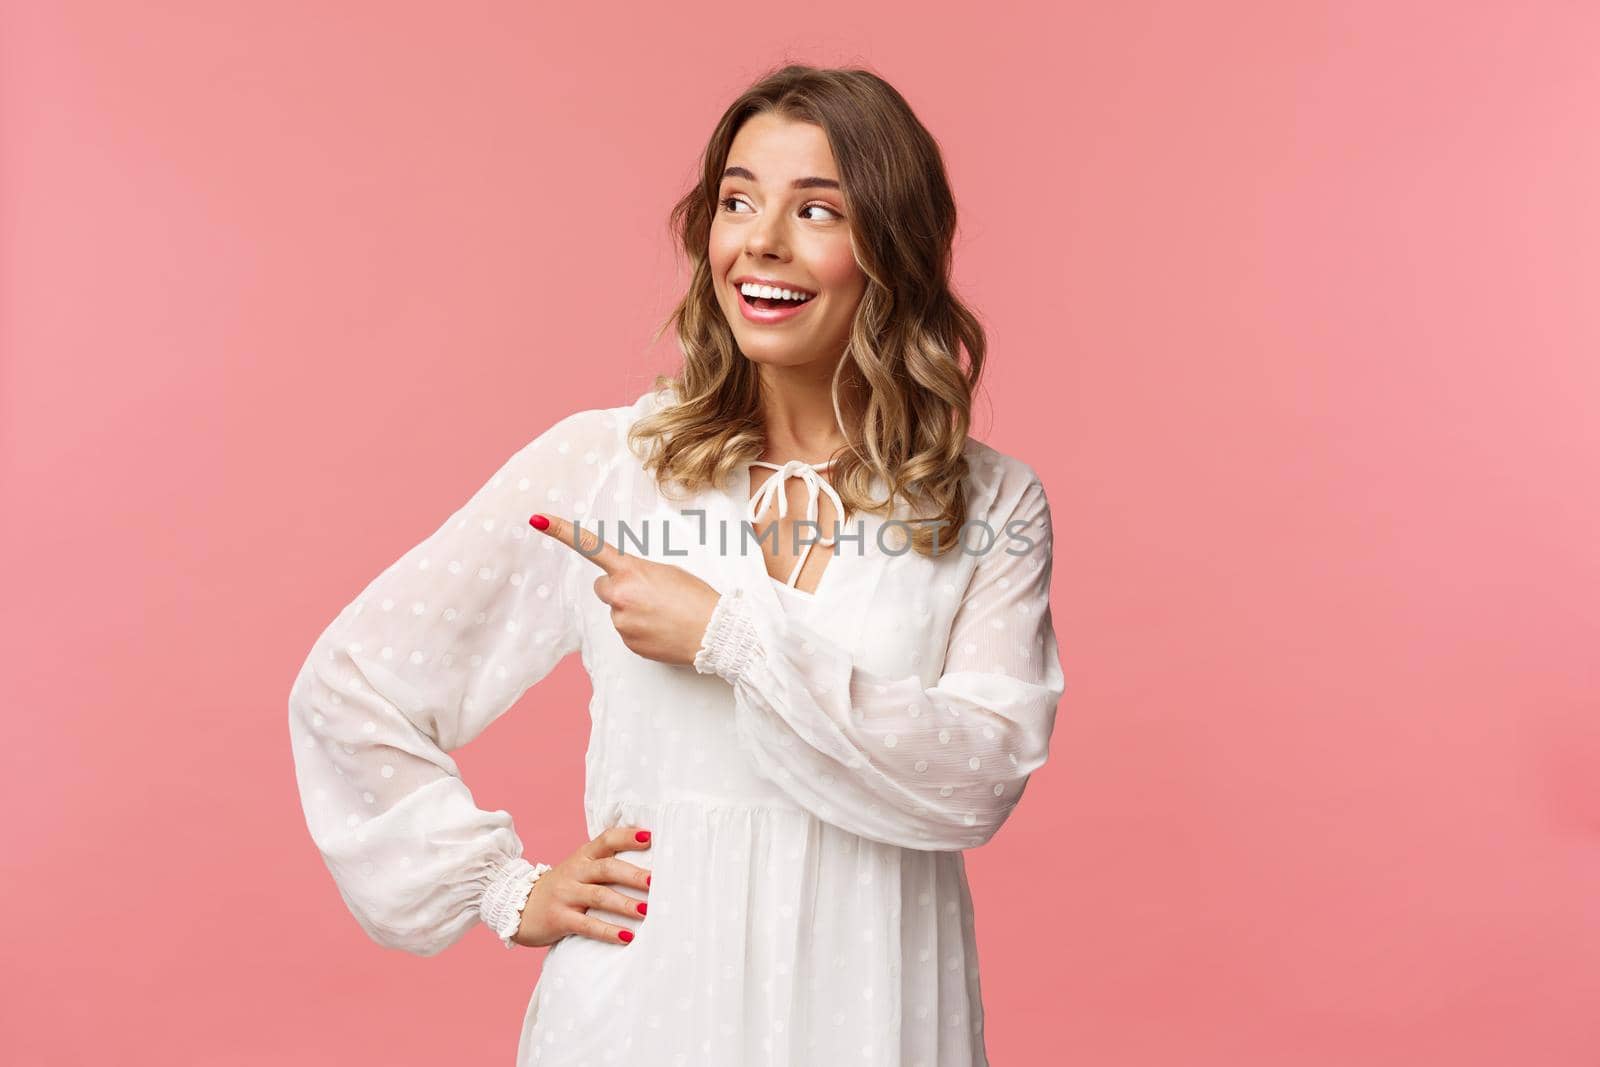 Curious upbeat beautiful blond woman enjoying summer feeling cheerful, pointing looking left with interested, enthusiastic expression, wear cute white dress, standing pink background.